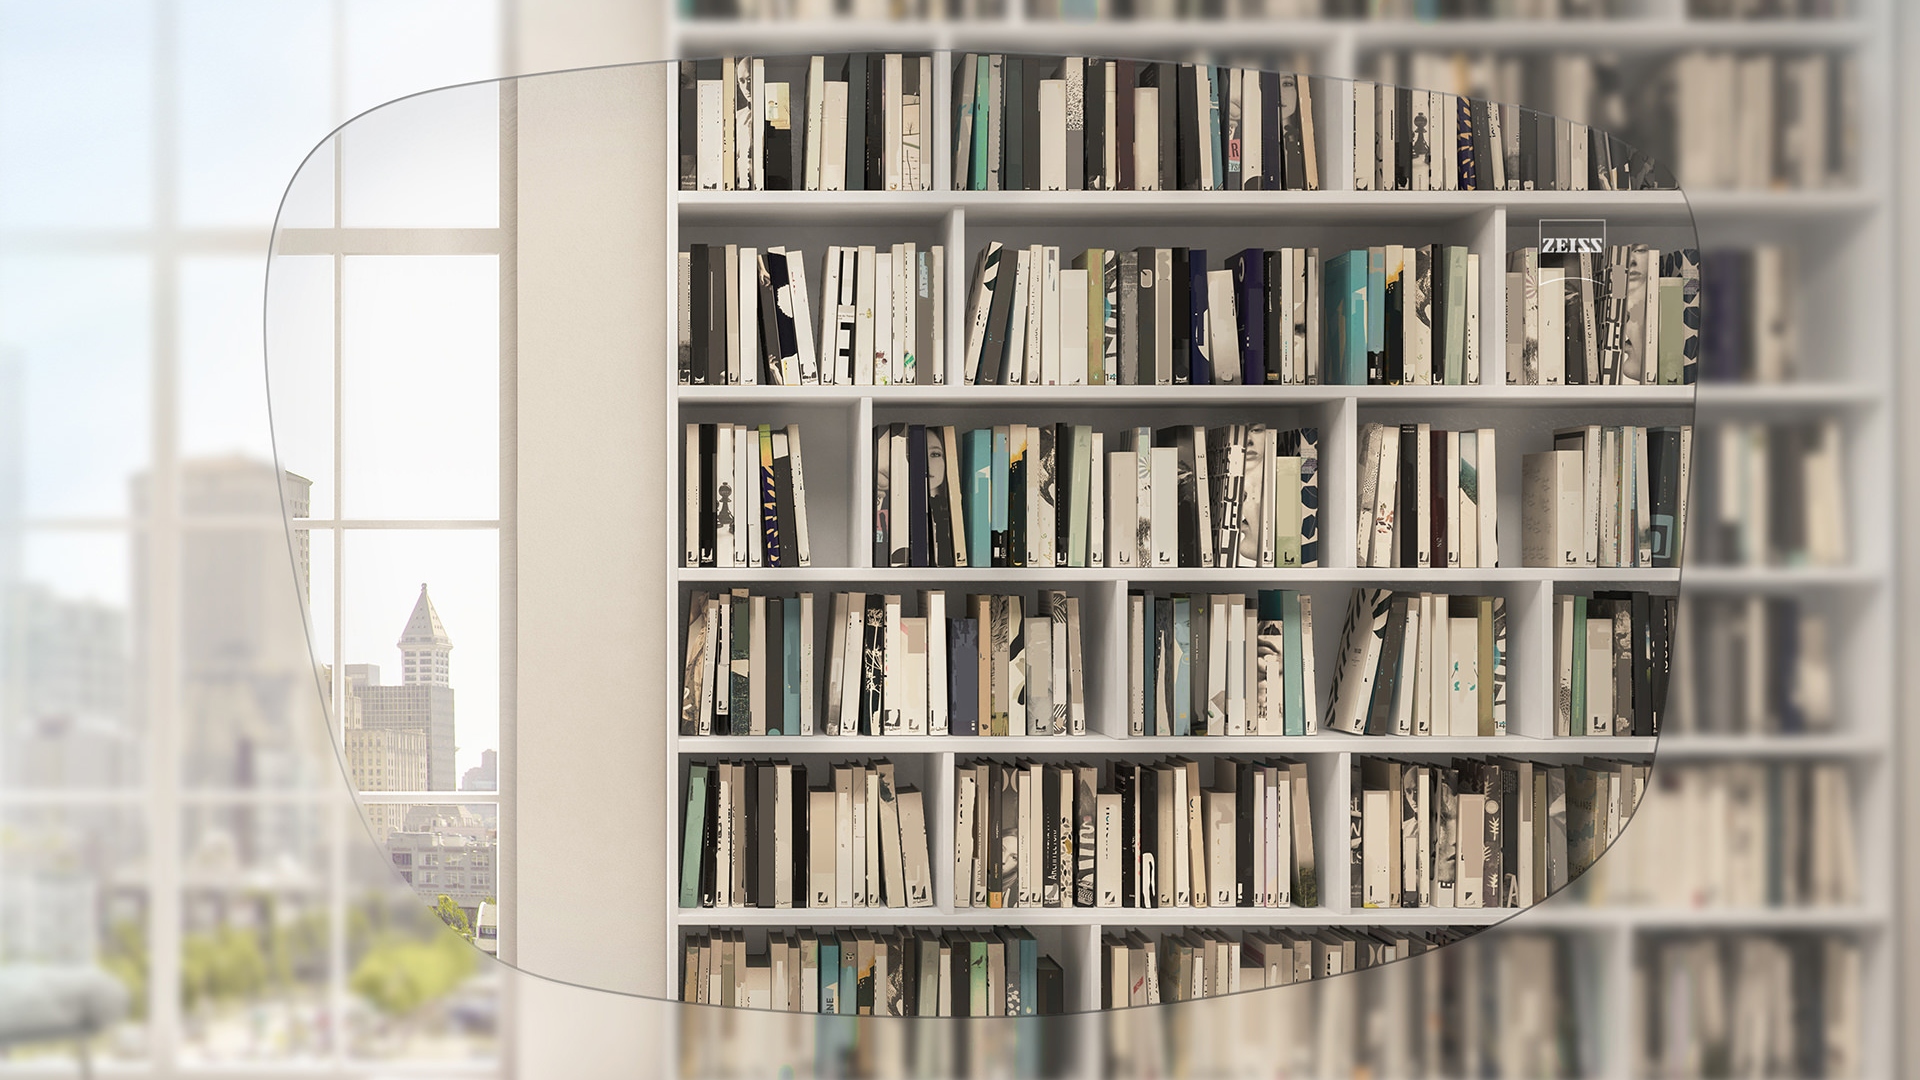 View through ZEISS Single Vision Individual Lens at book shelf and window 